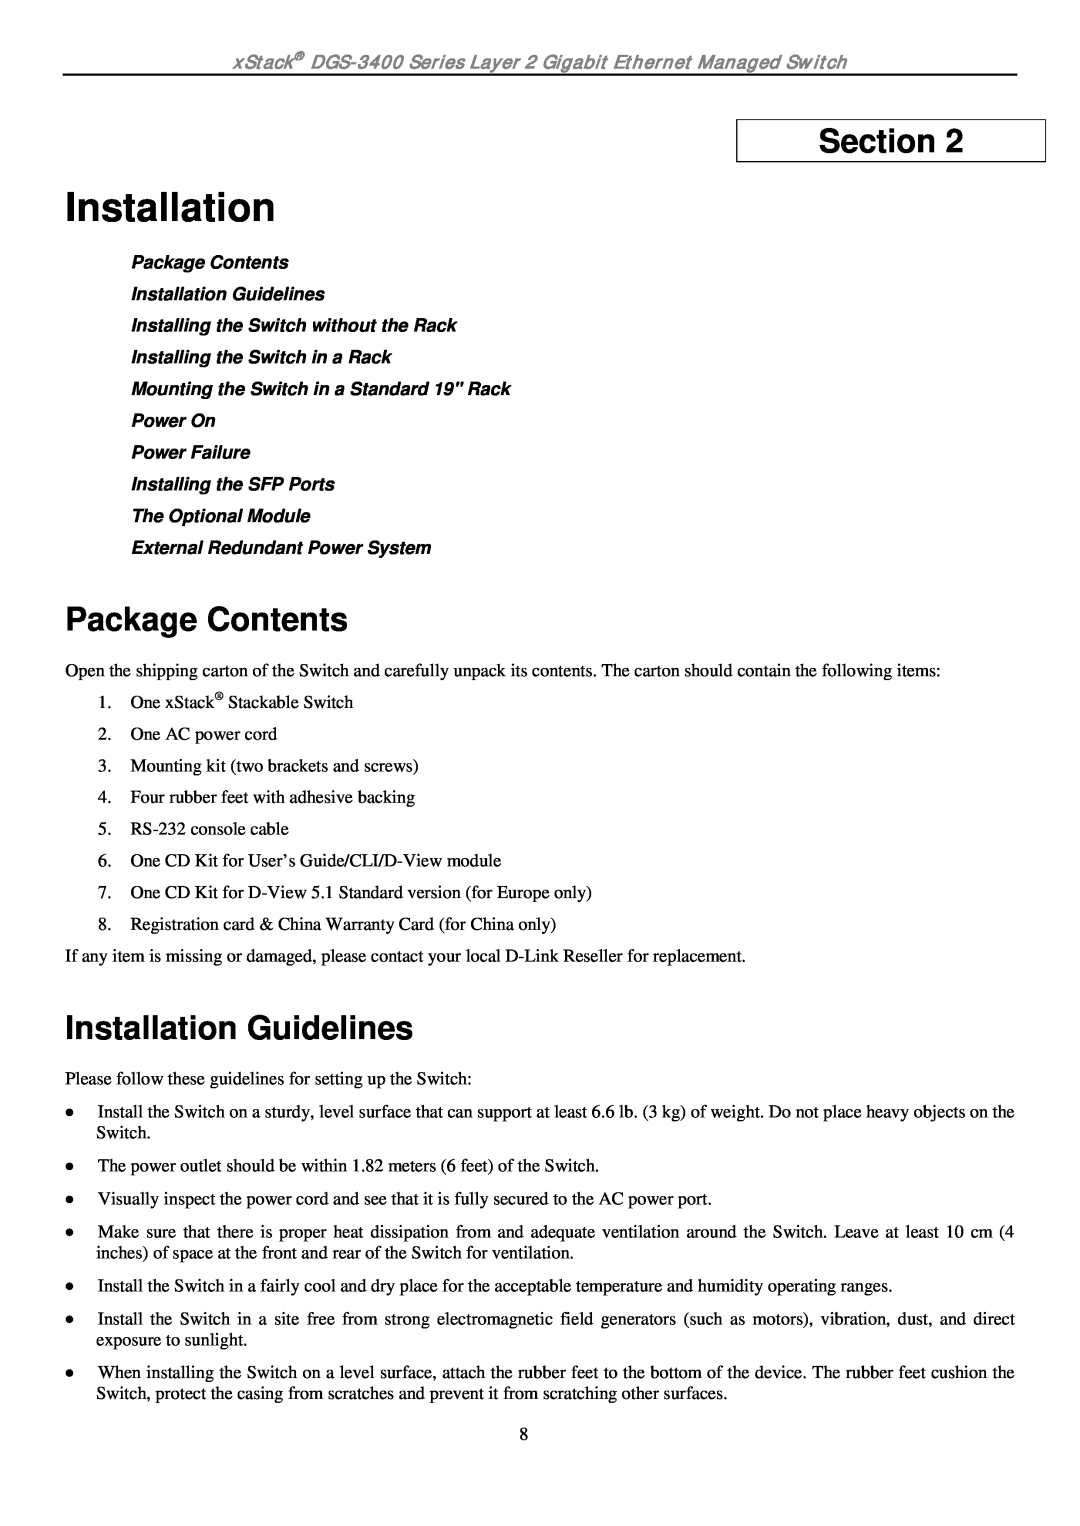 D-Link ethernet managed switch Package Contents, Installation Guidelines, Section, Installing the Switch in a Rack 